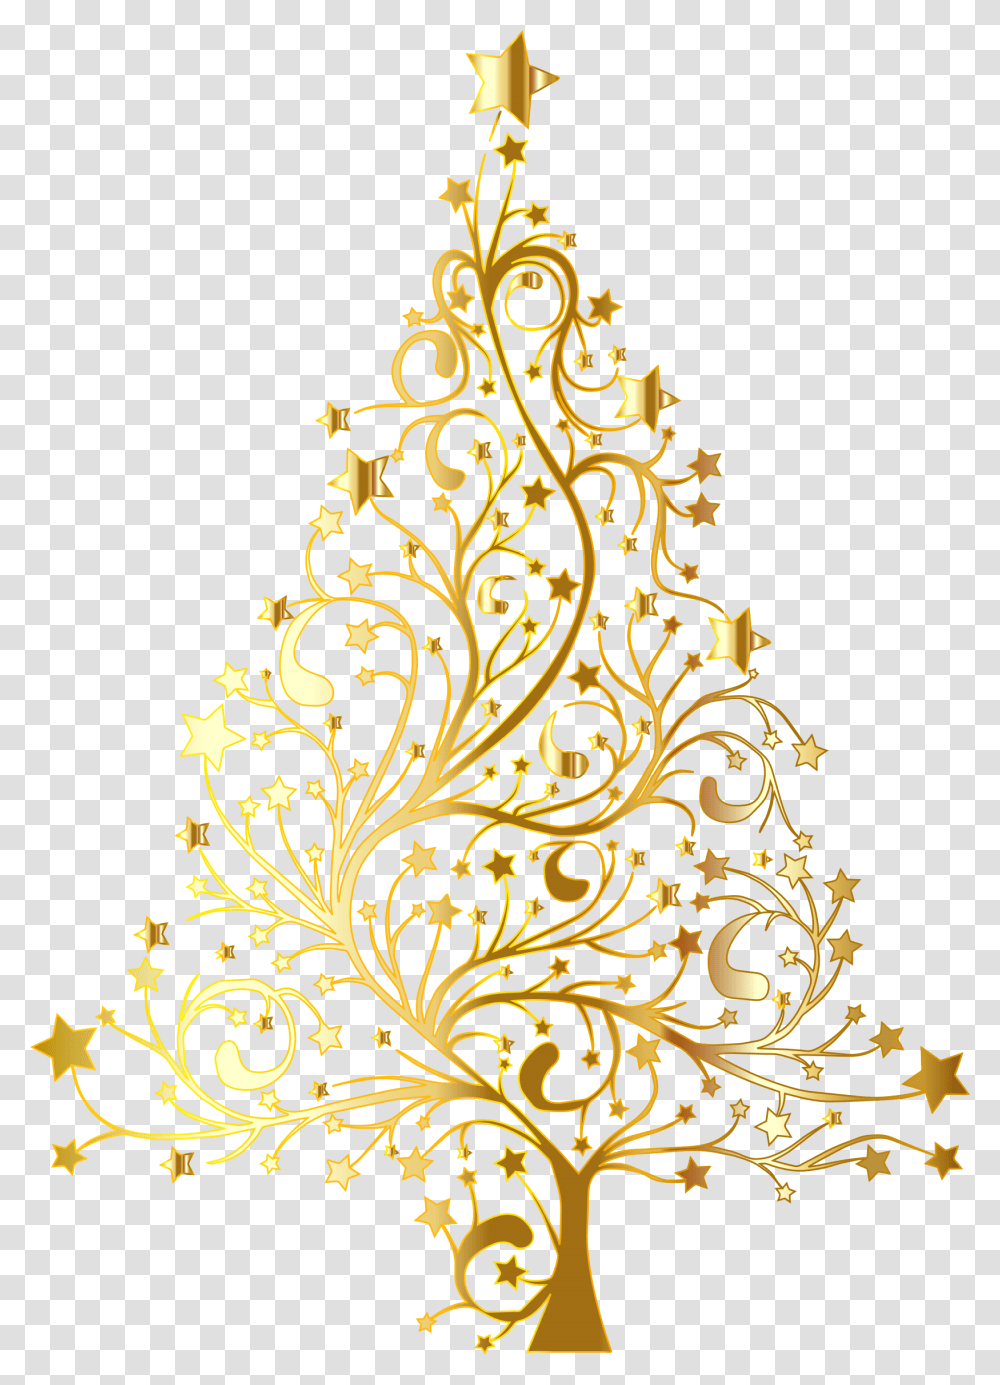 Starry Christmas Tree Gold No Background Clip Arts Gold Christmas Tree Vector, Floral Design, Pattern Transparent Png